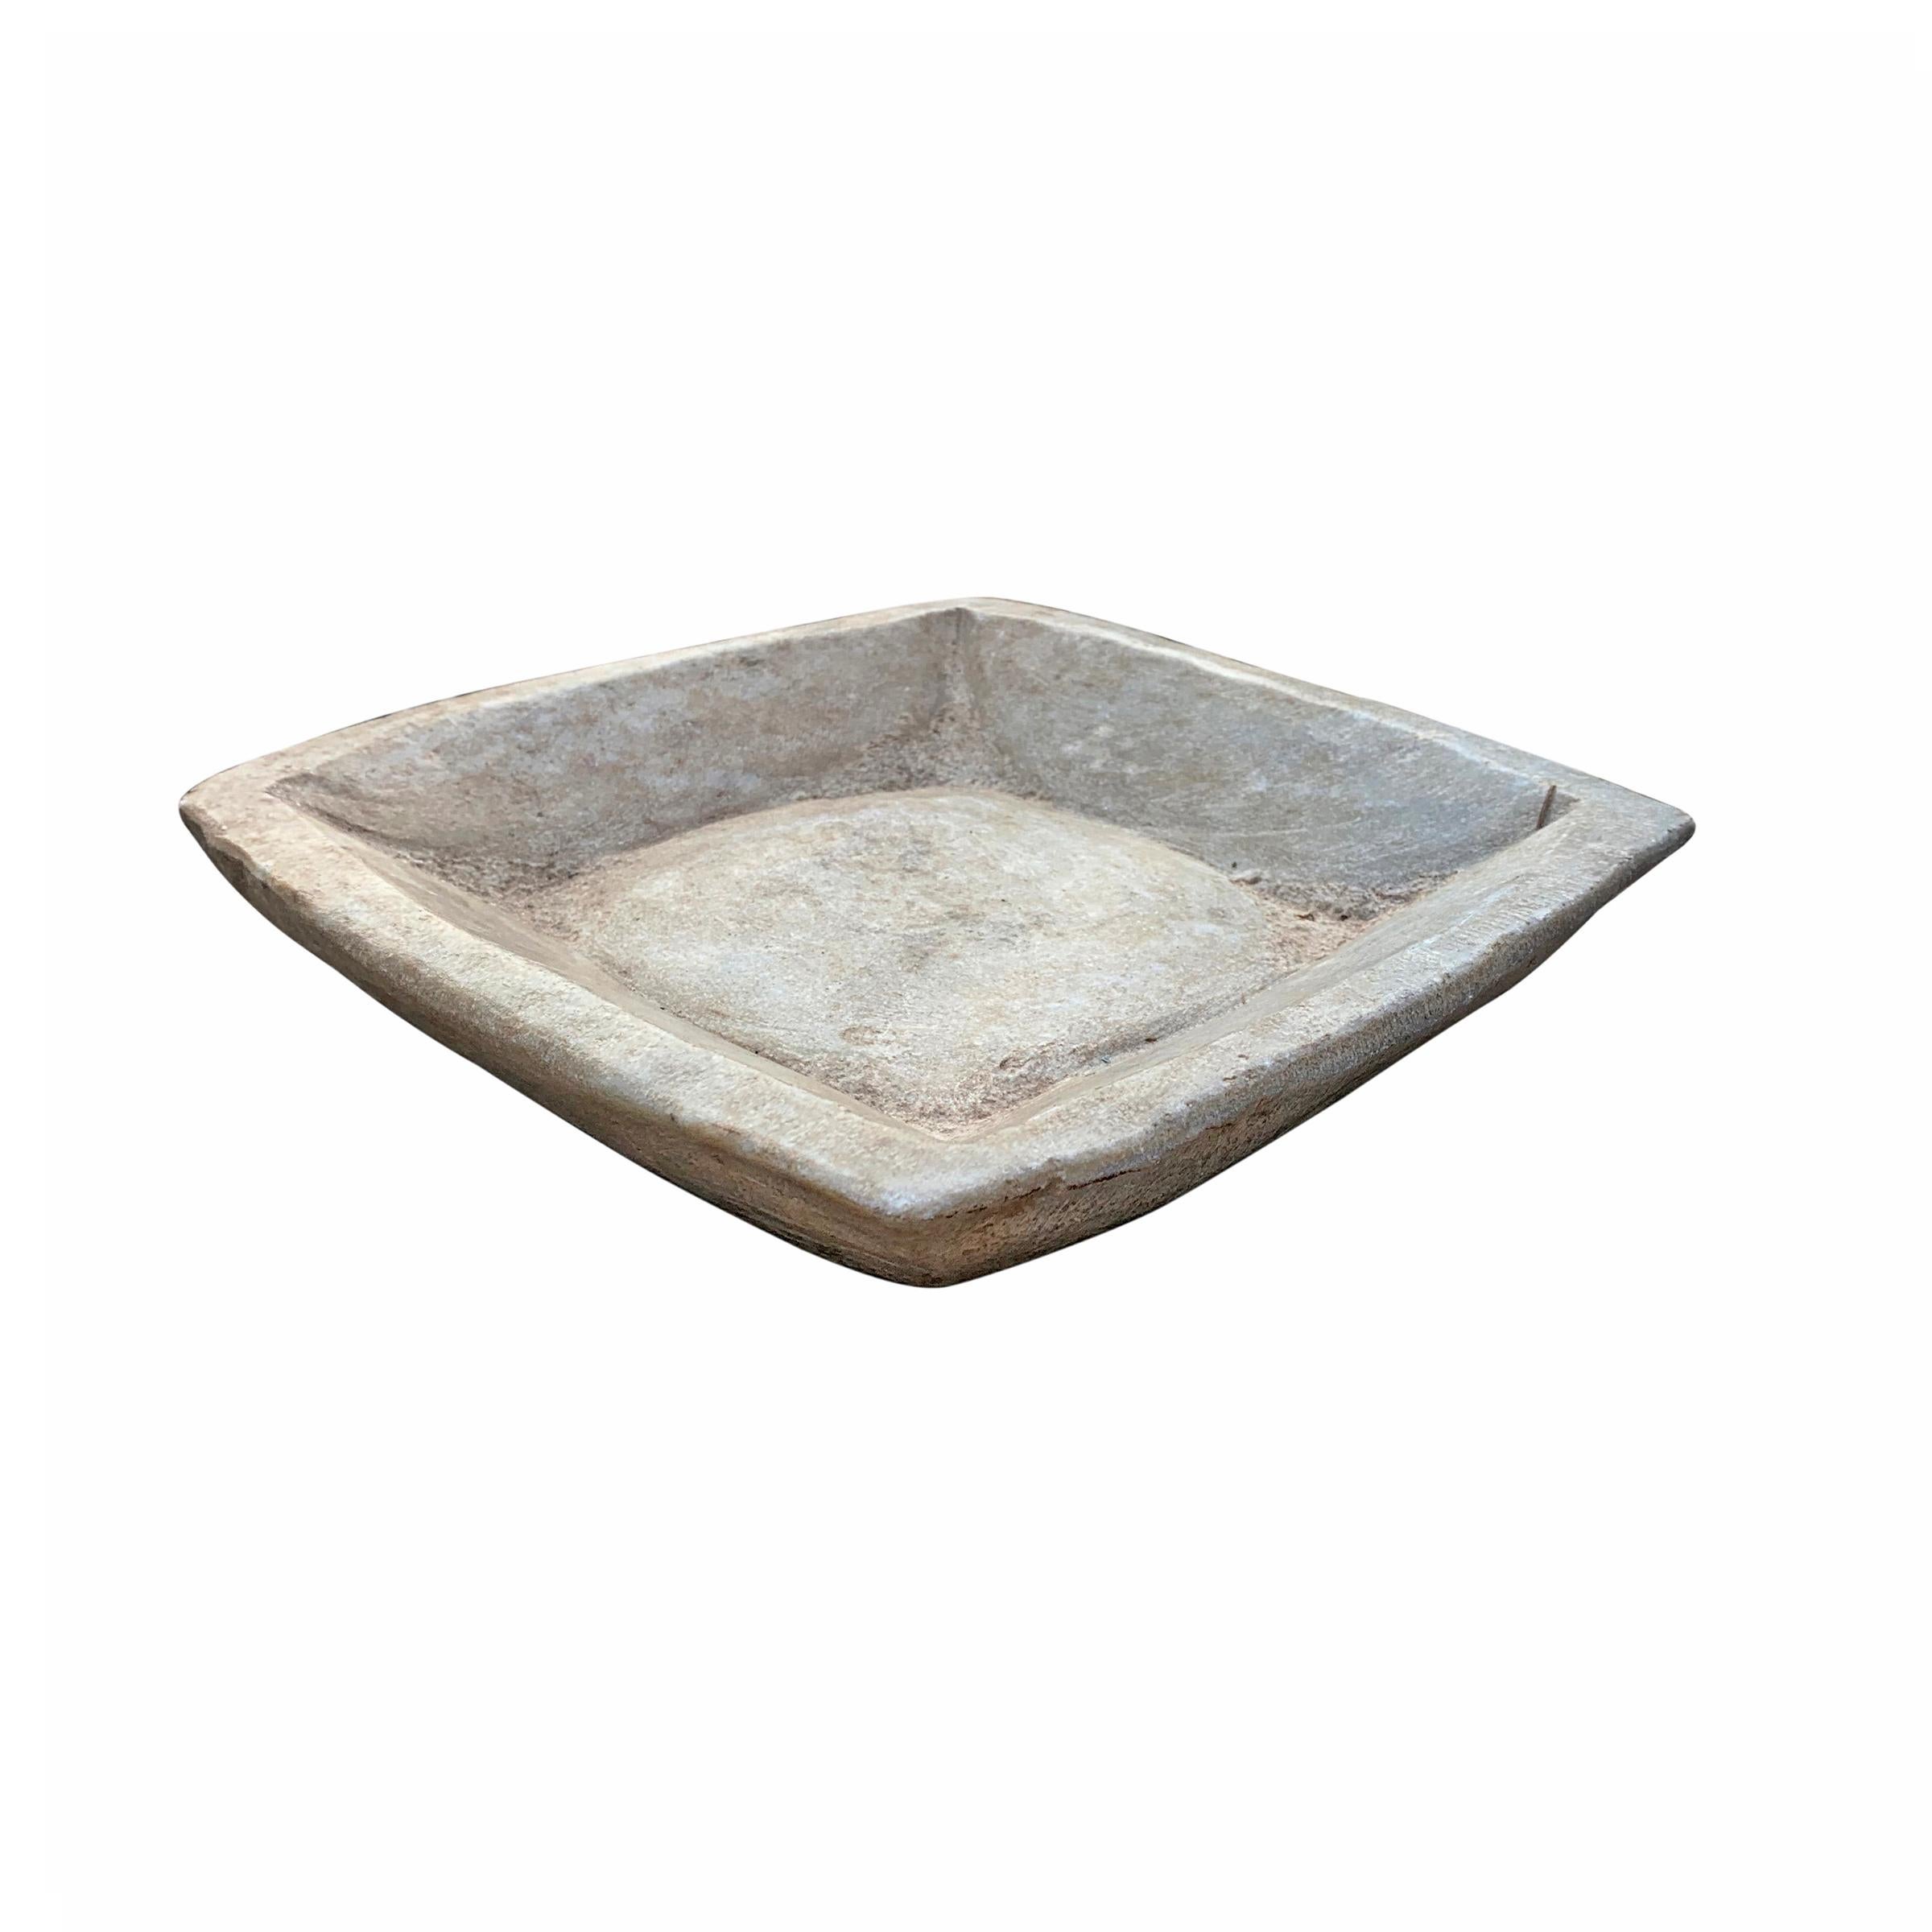 Indian Hand-Carved Marble Square Dish